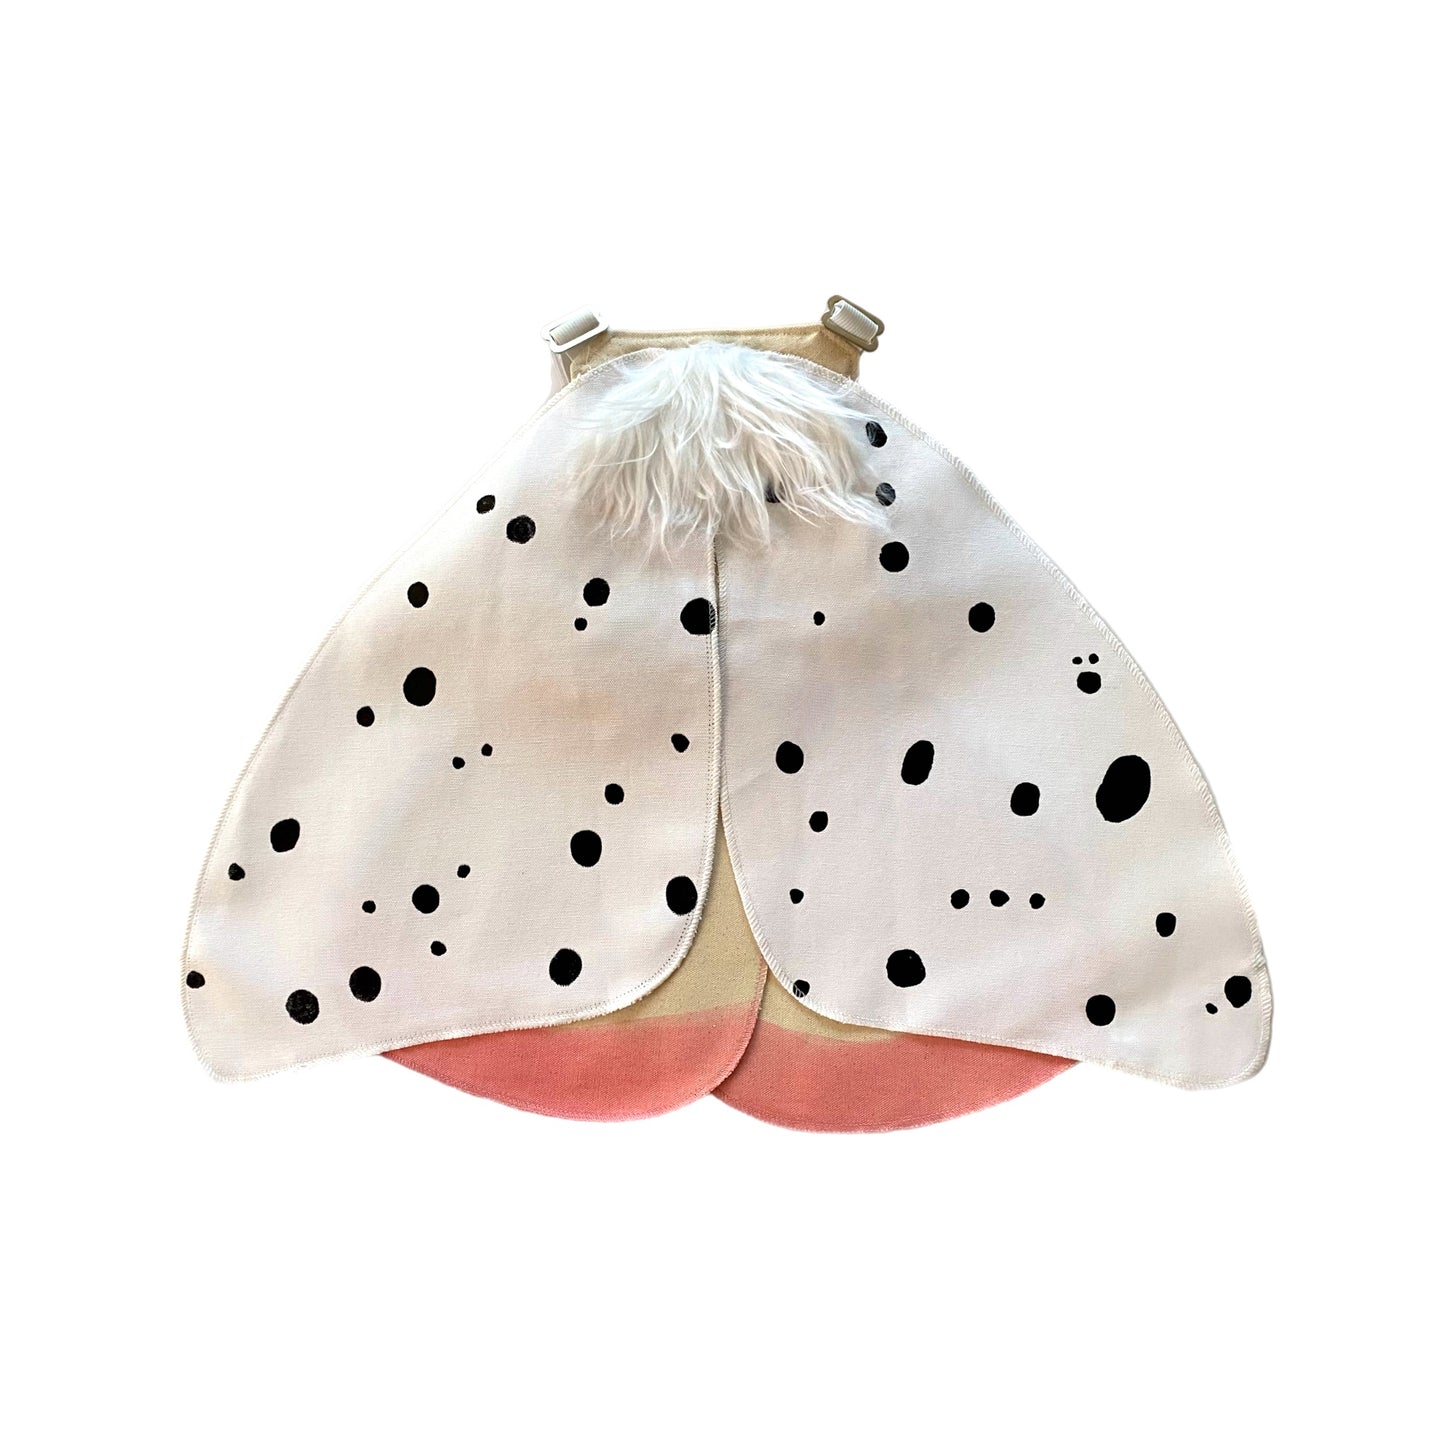 Kids furry white moth costume wings from Jack Be Nimble.